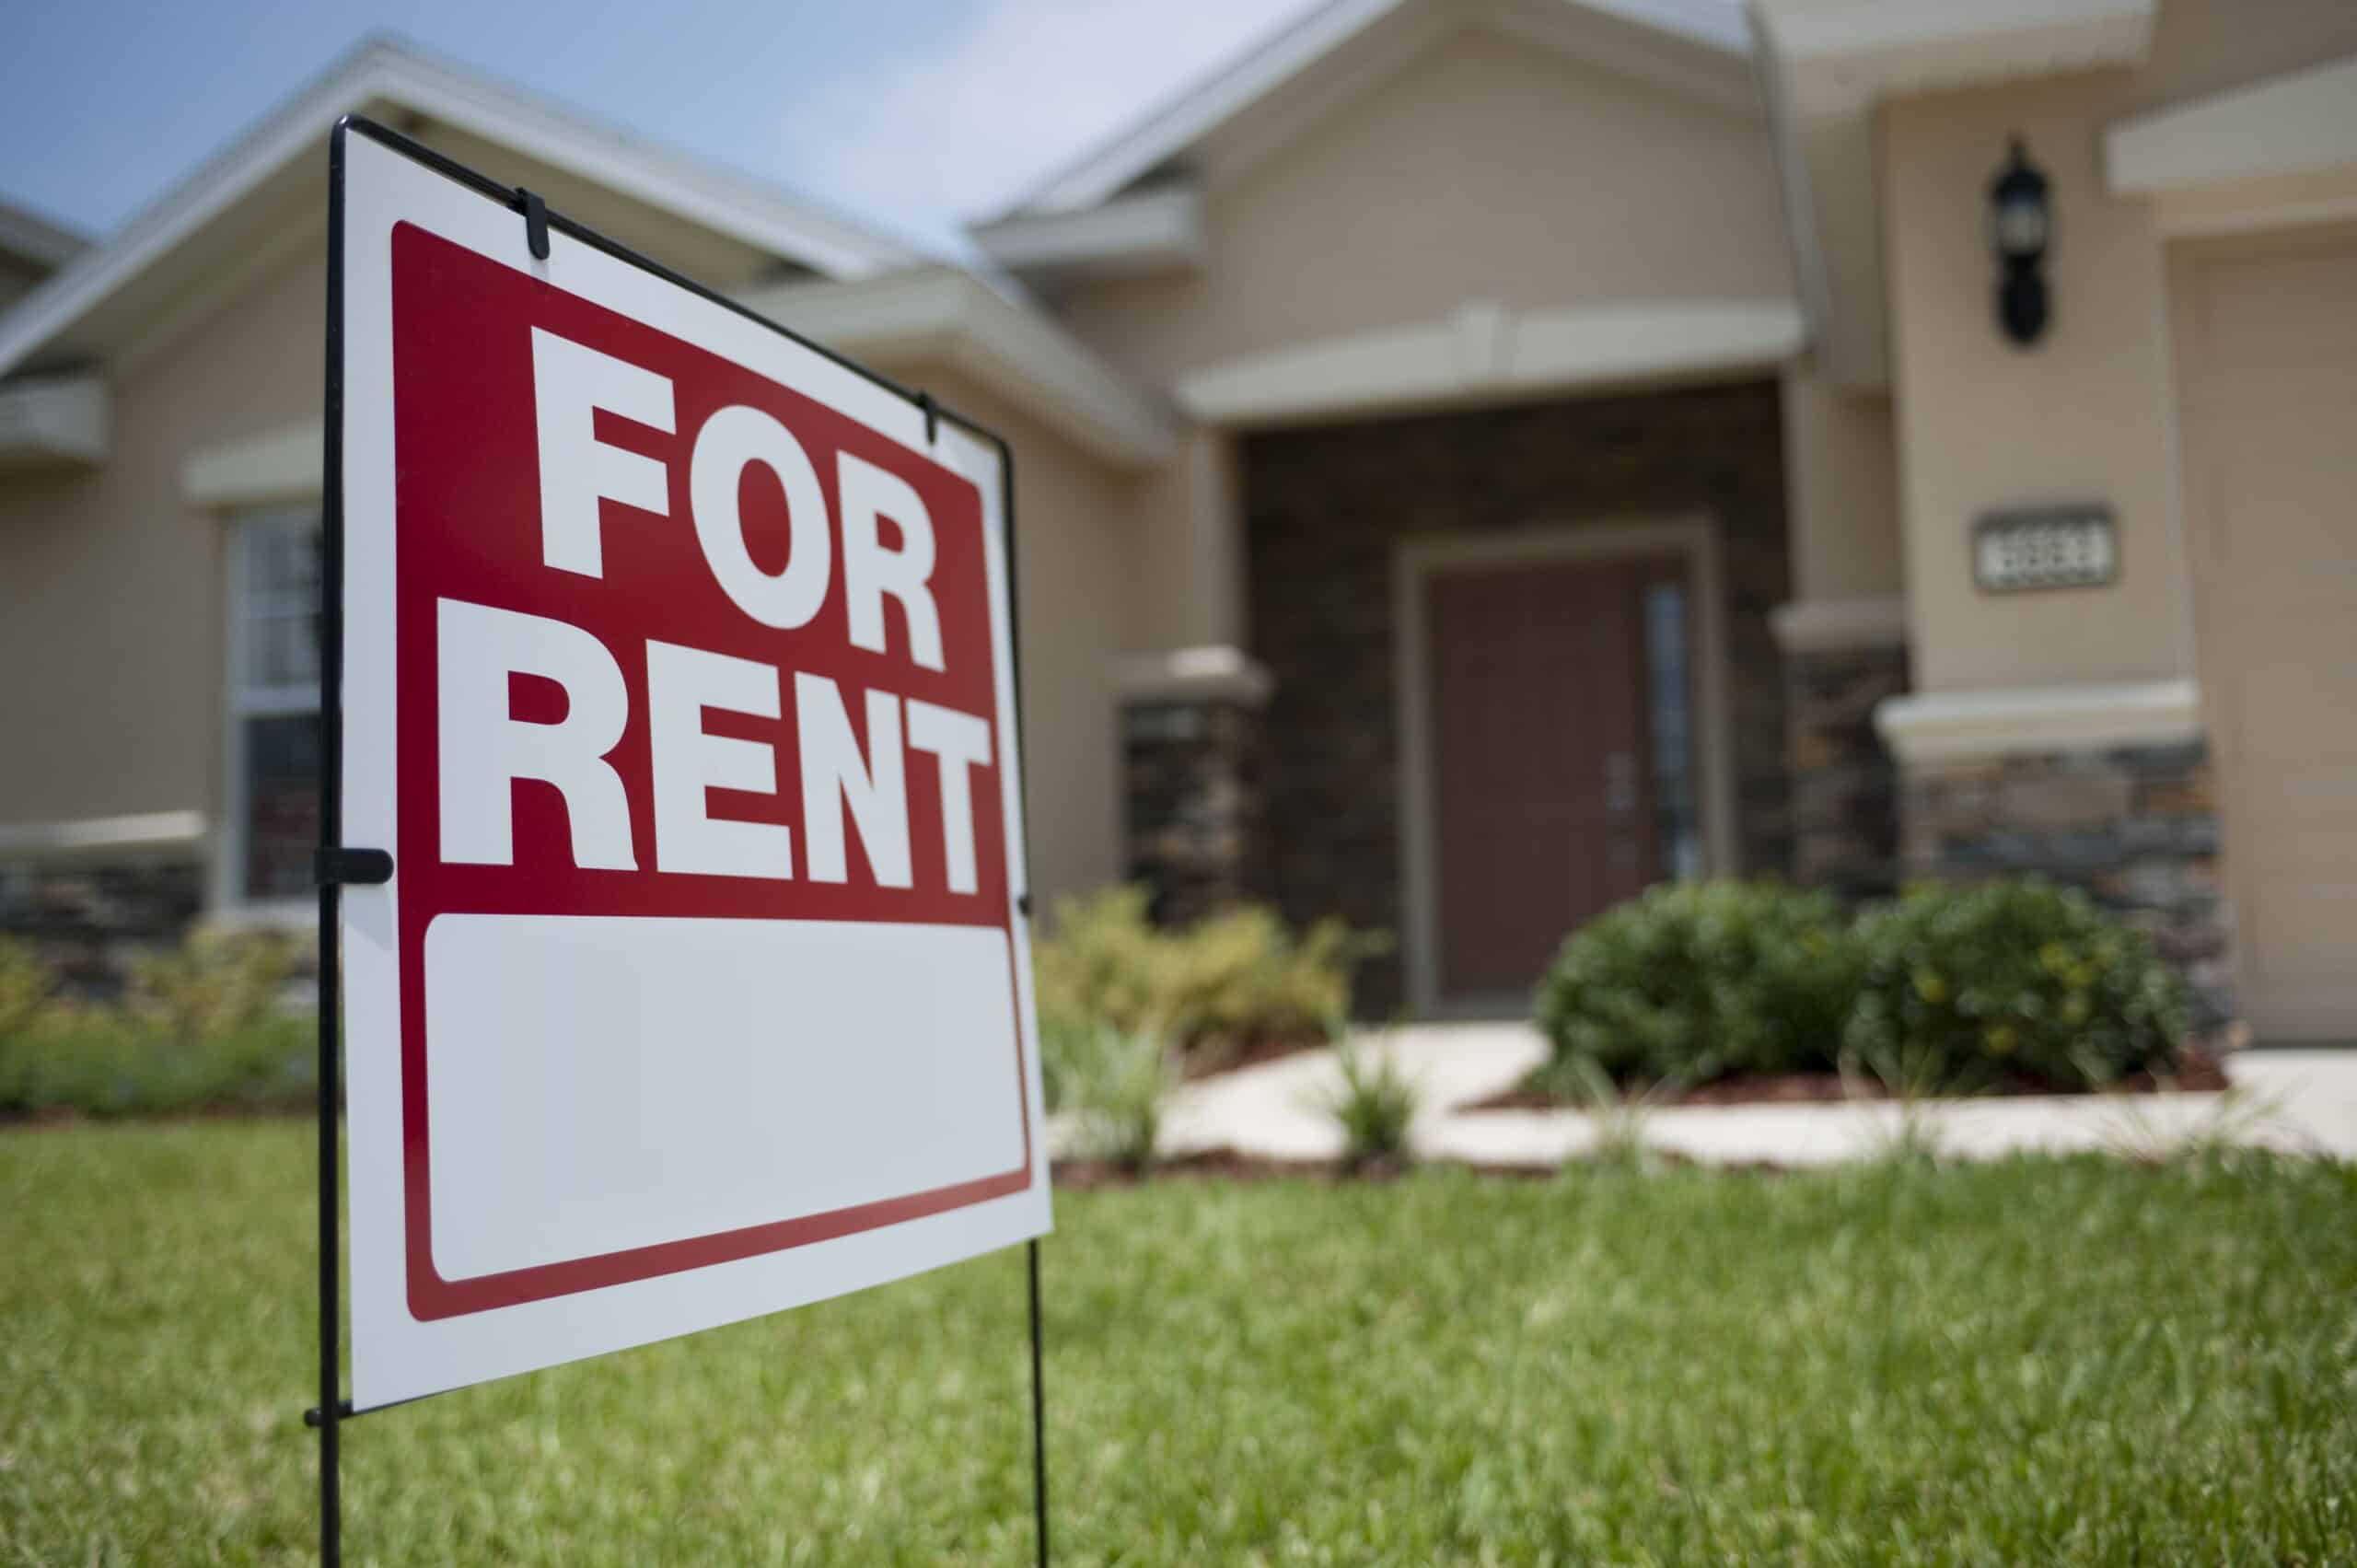 Things You Should Check Before Renting a Property